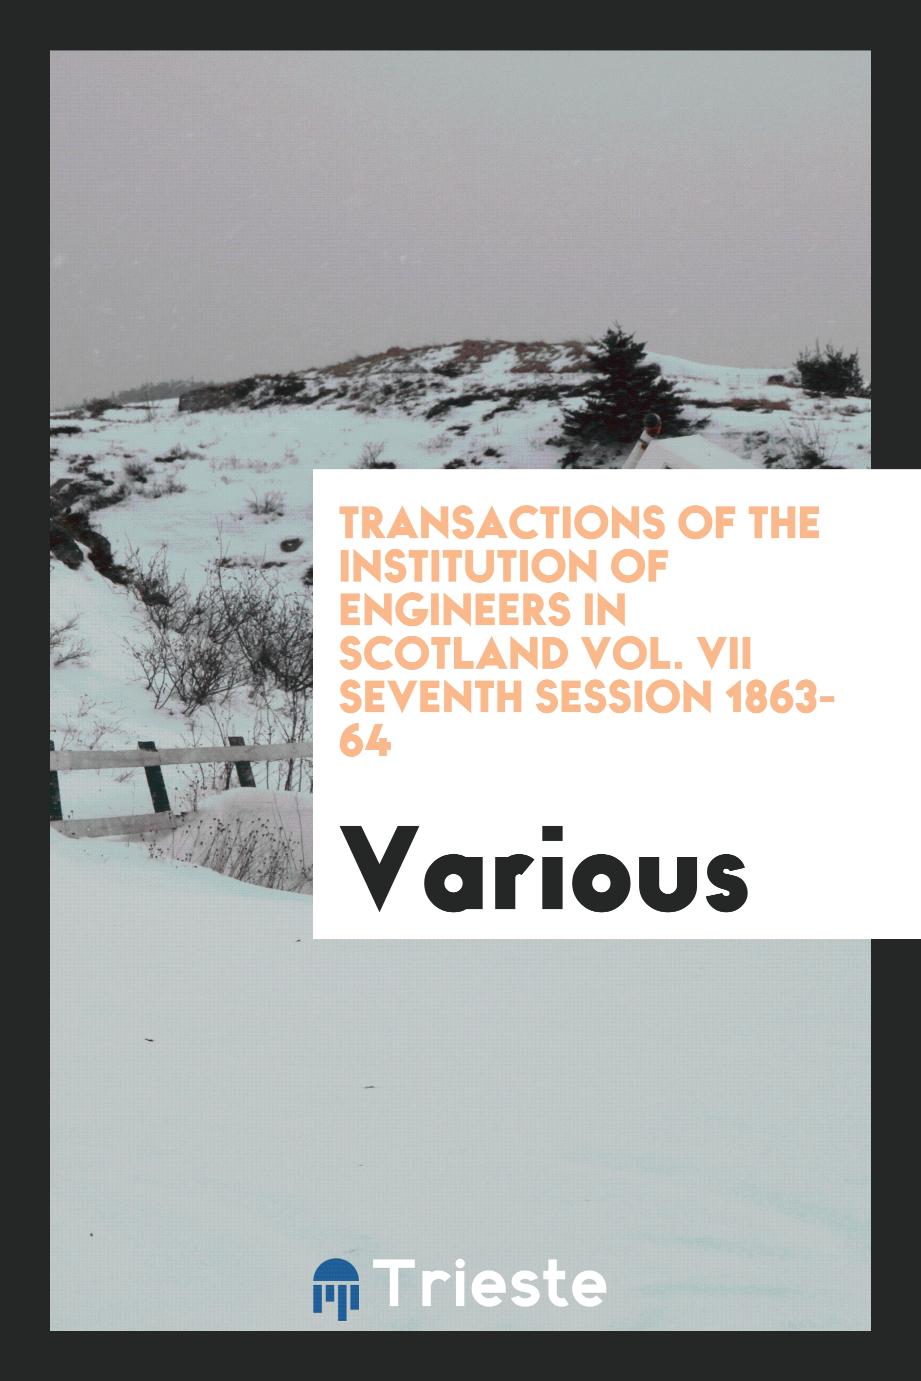 Transactions of the Institution of Engineers in Scotland Vol. VII Seventh Session 1863-64